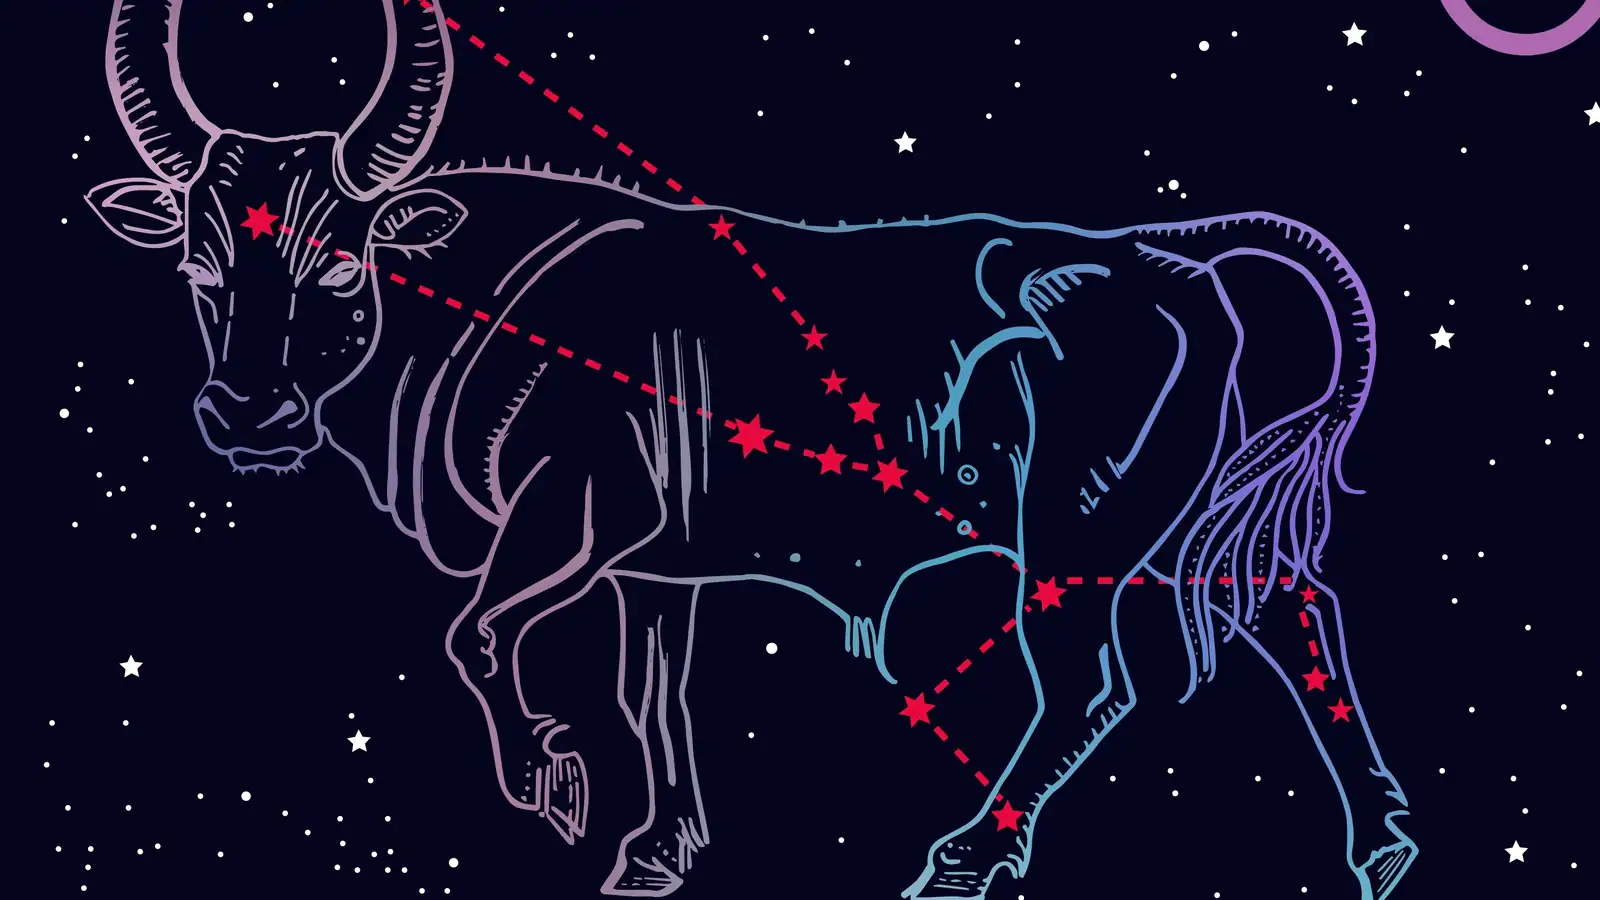 Taurus Horoscope predictions for March 27: Your health needs attention